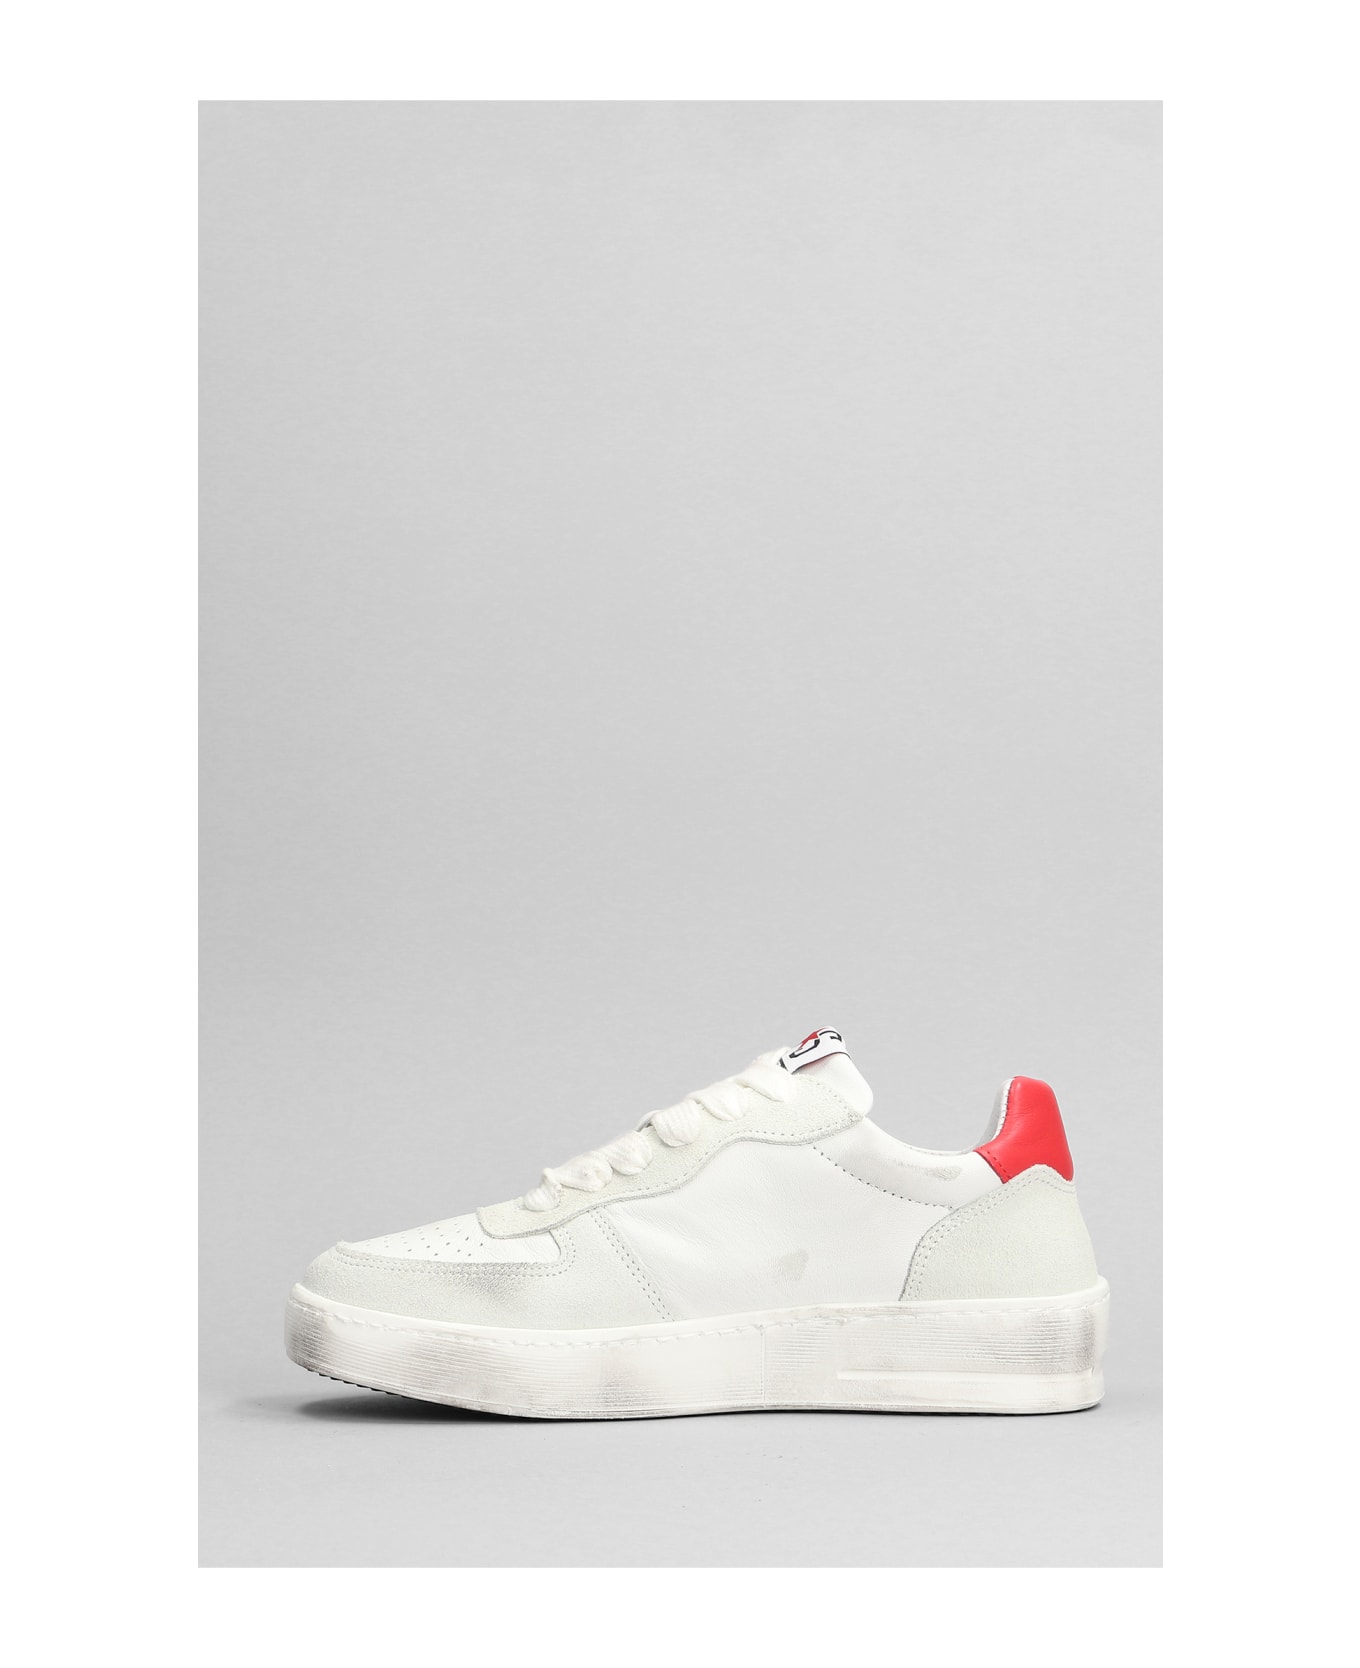 2Star Padel Star Sneakers In White Suede And Leather - white